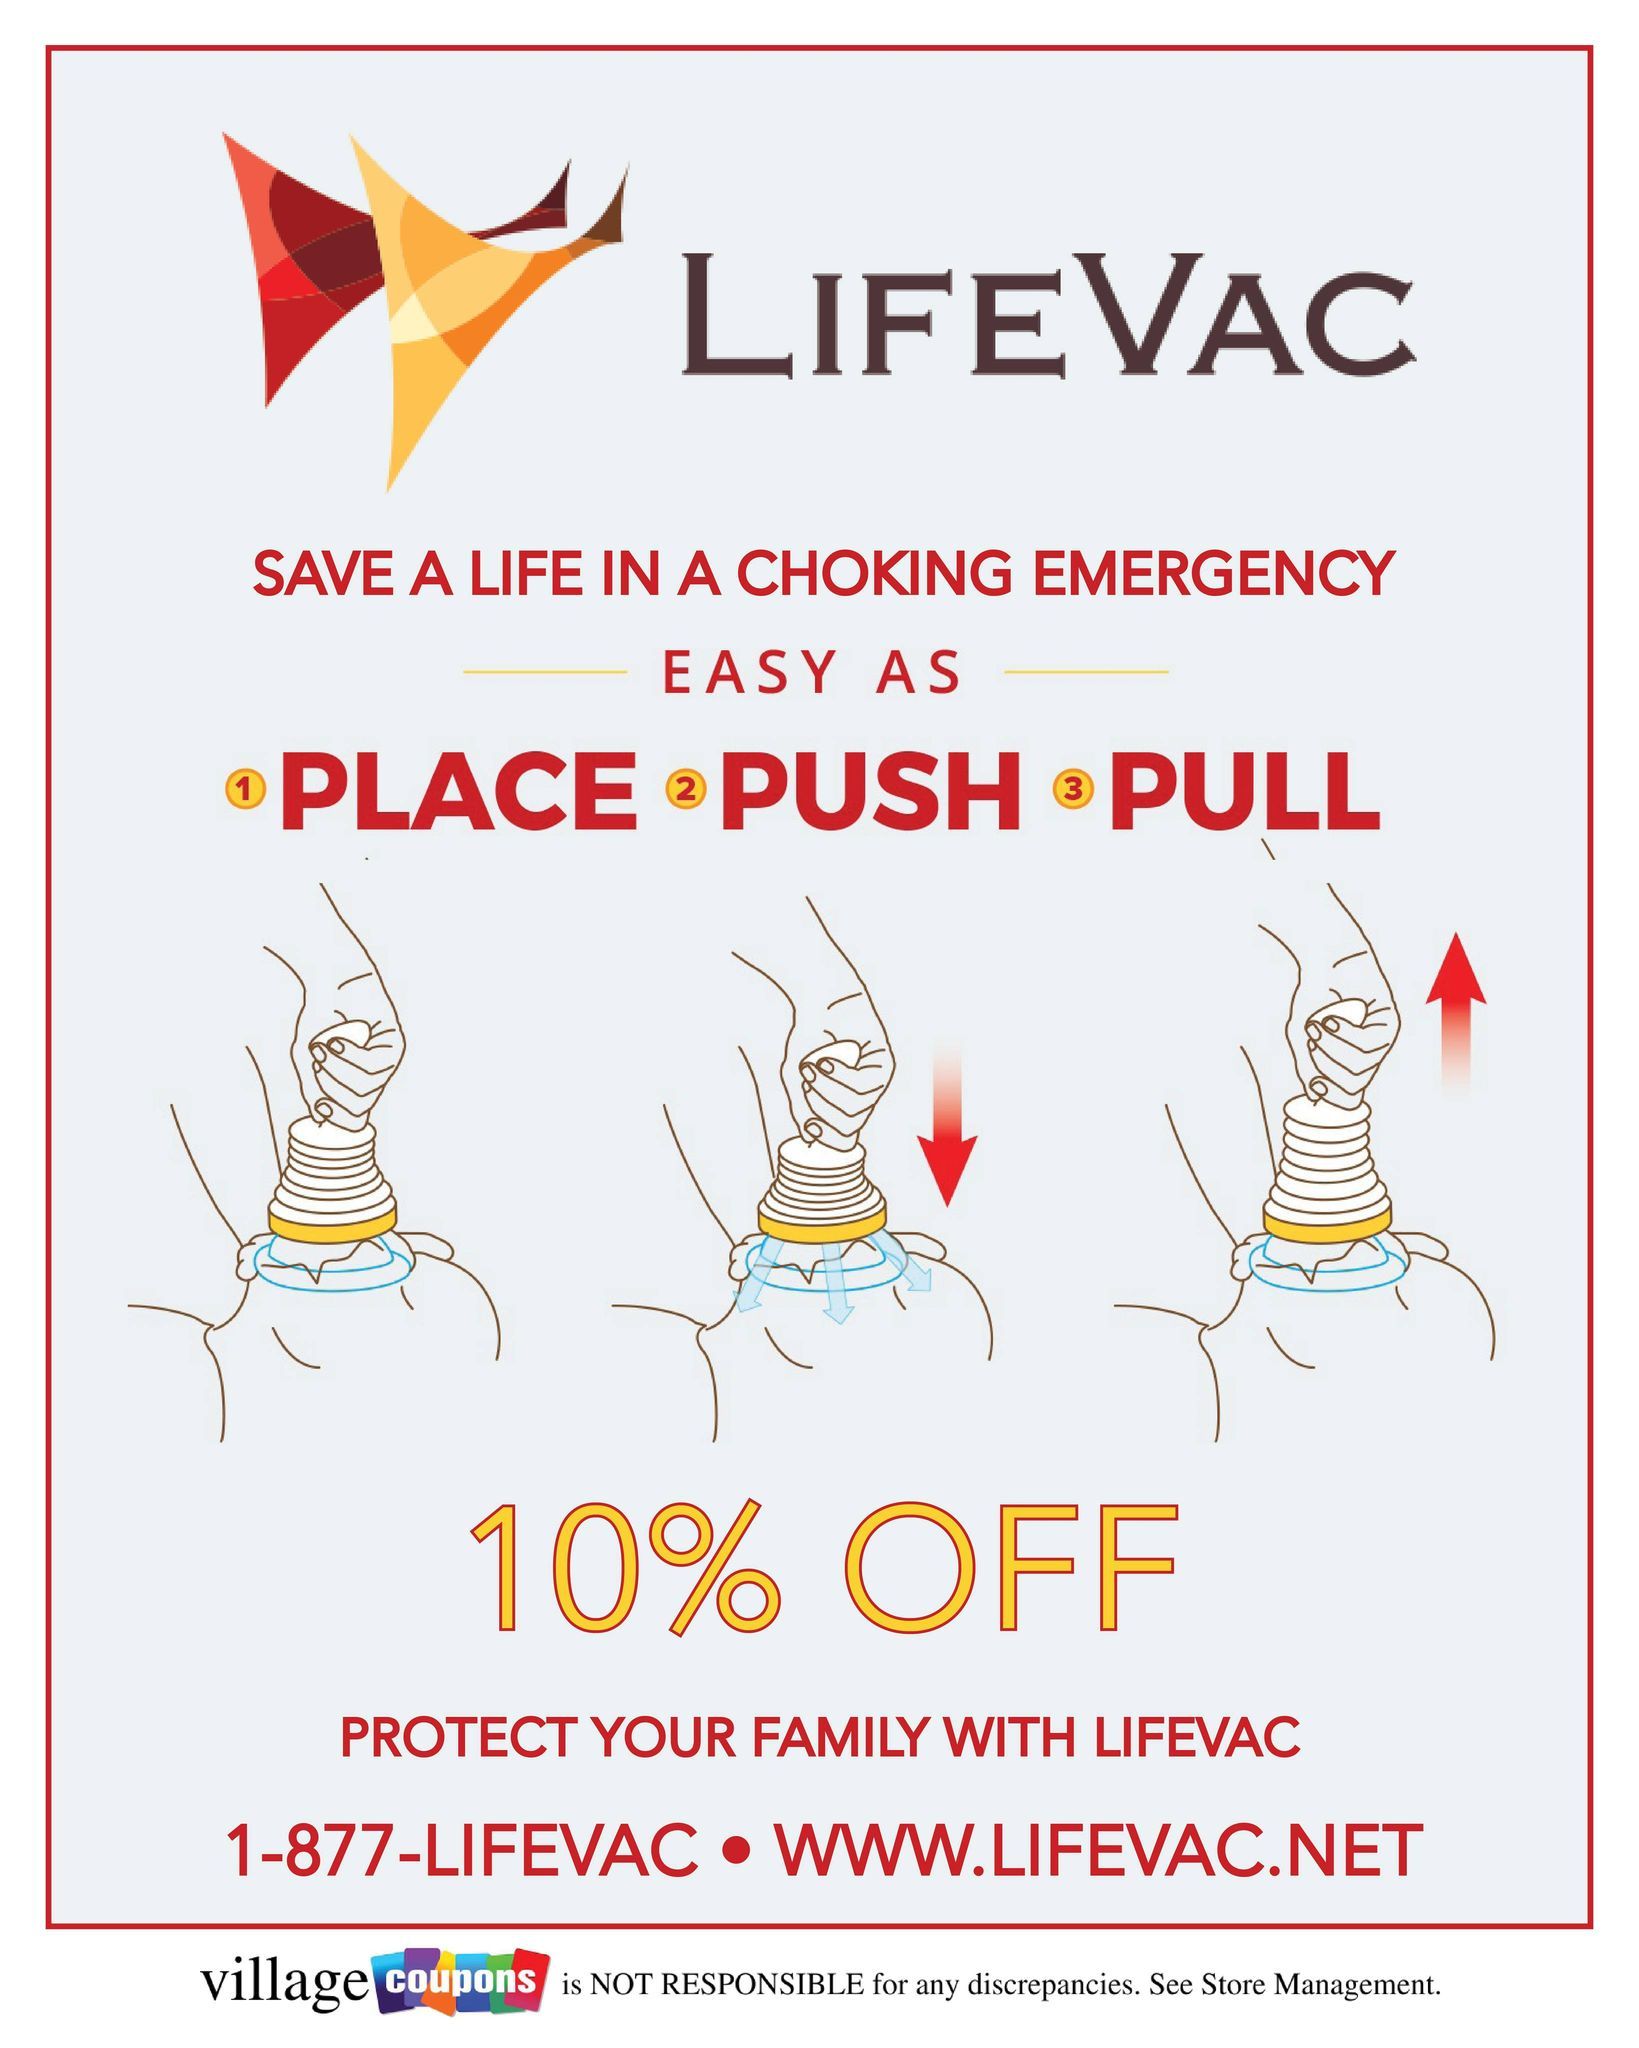 An advertisement for lifevac that says 10 % off